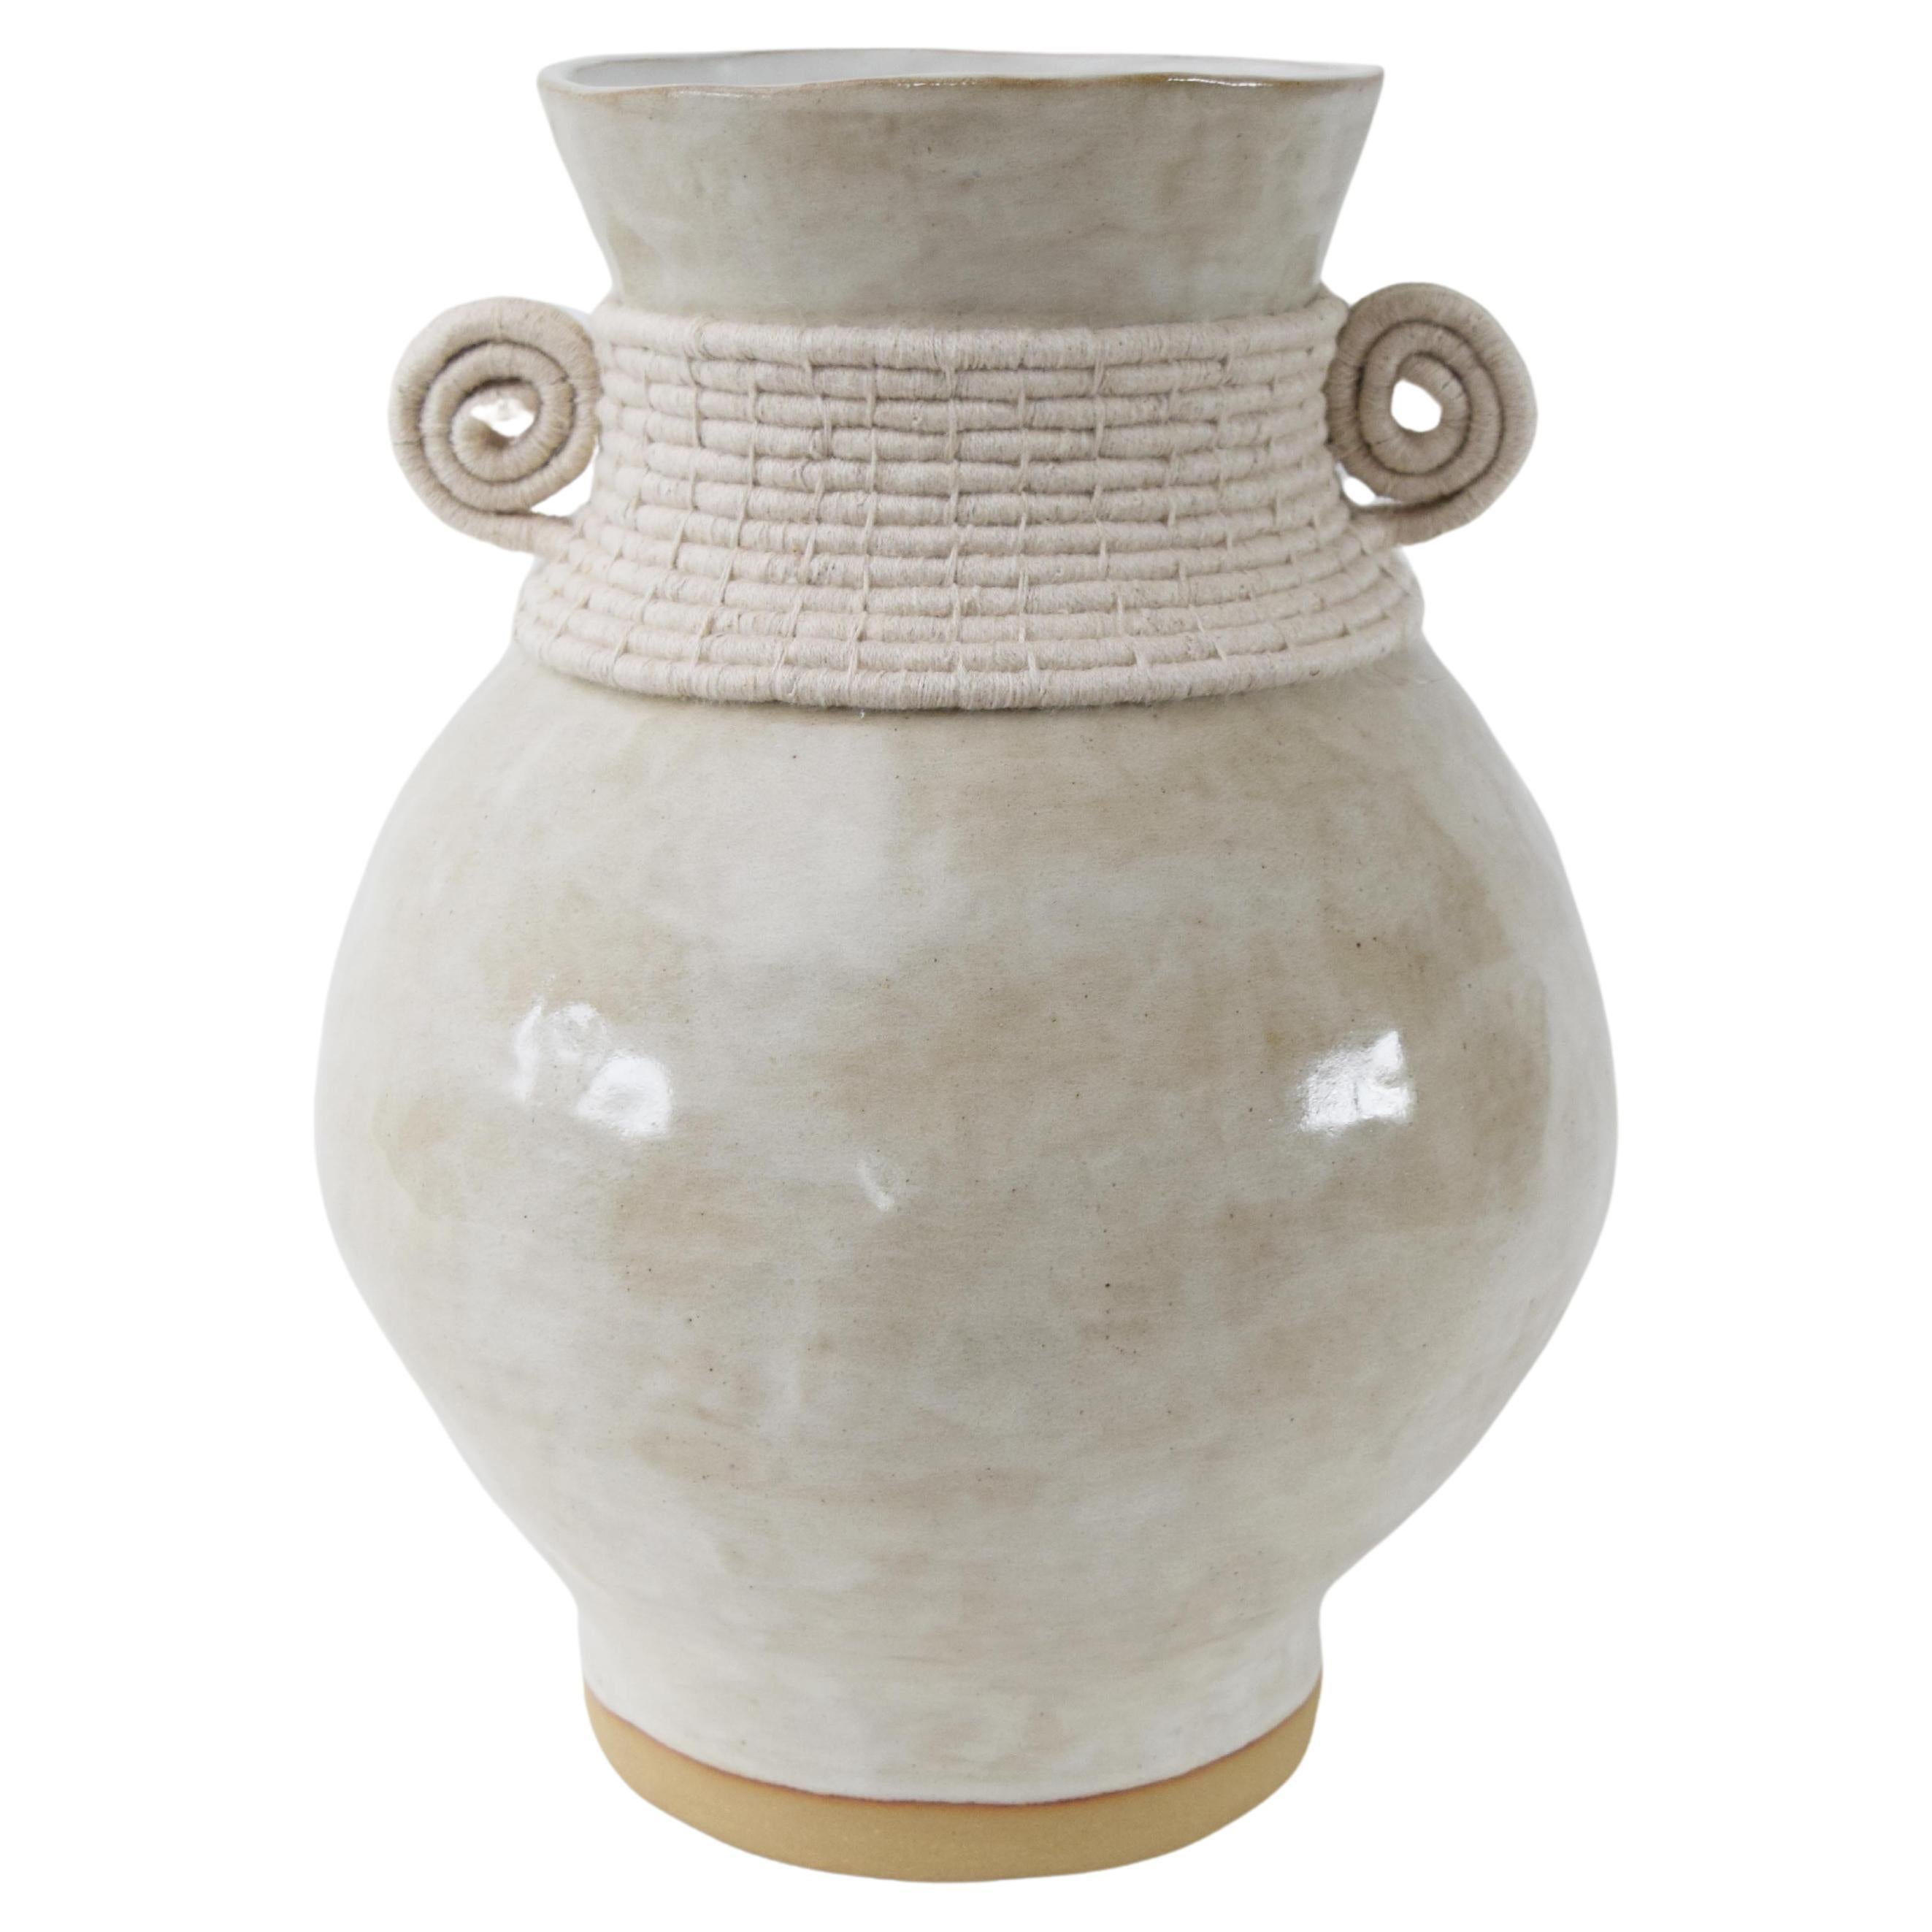 One of a Kind Handmade Ceramic Vase #796 - Off White Glaze & Woven Cotton Detail